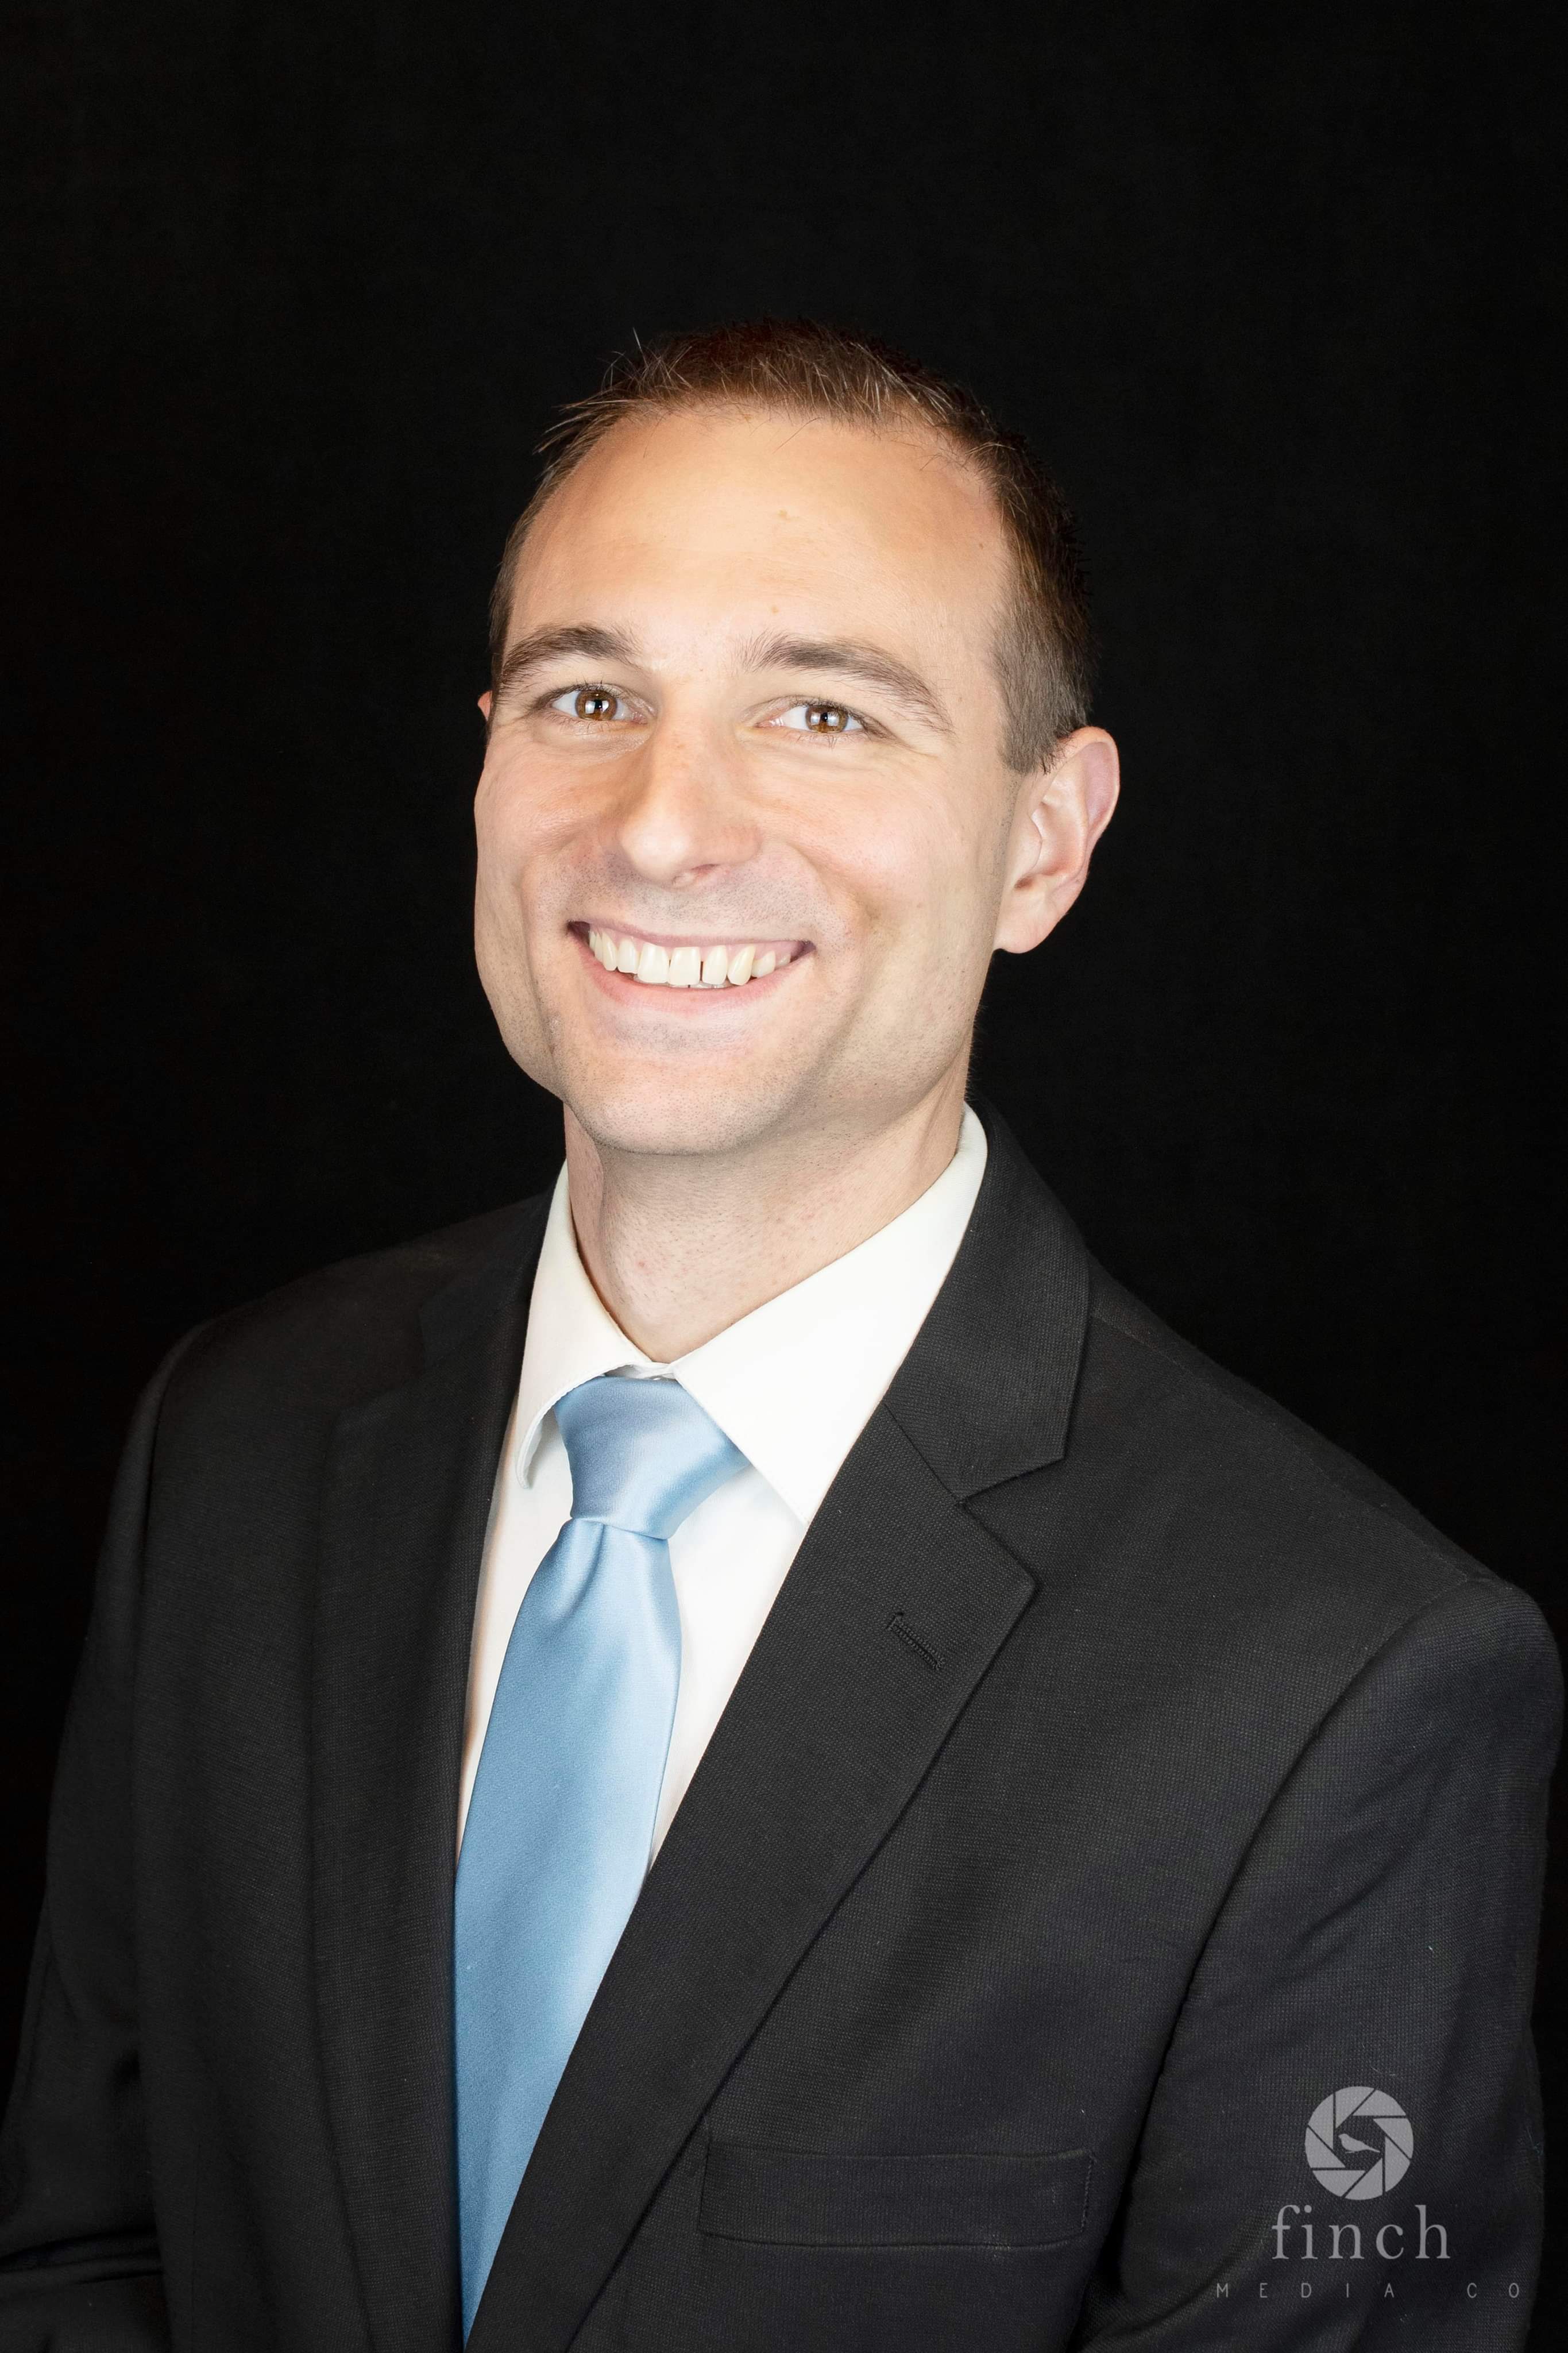 CHRISTOPHER J. MACKINLAY Financial Professional & Insurance Agent